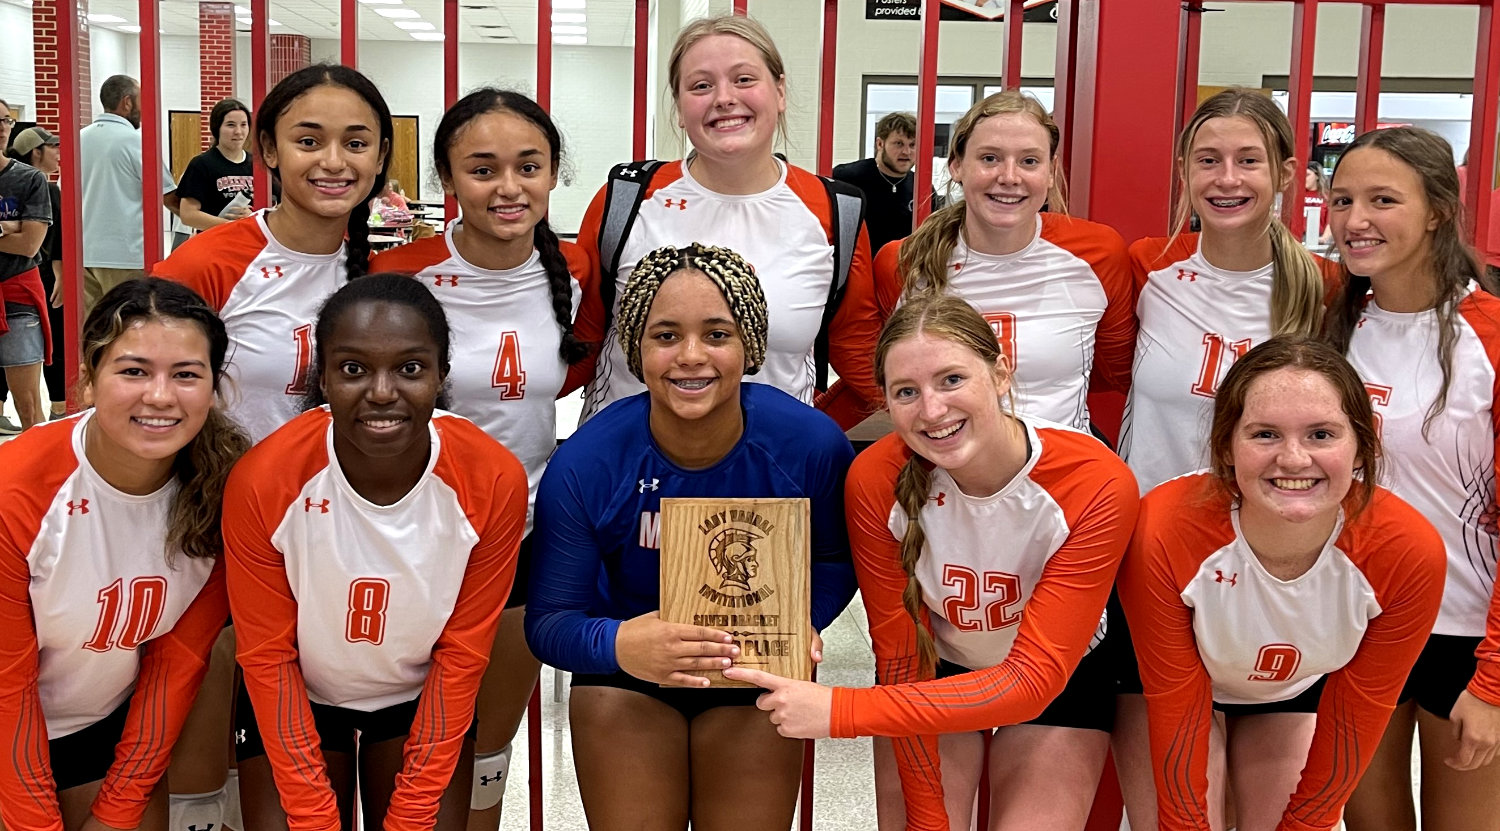 The Mineola Lady Jackets show off their silver bracket trophy from the Van tournament last weekend.